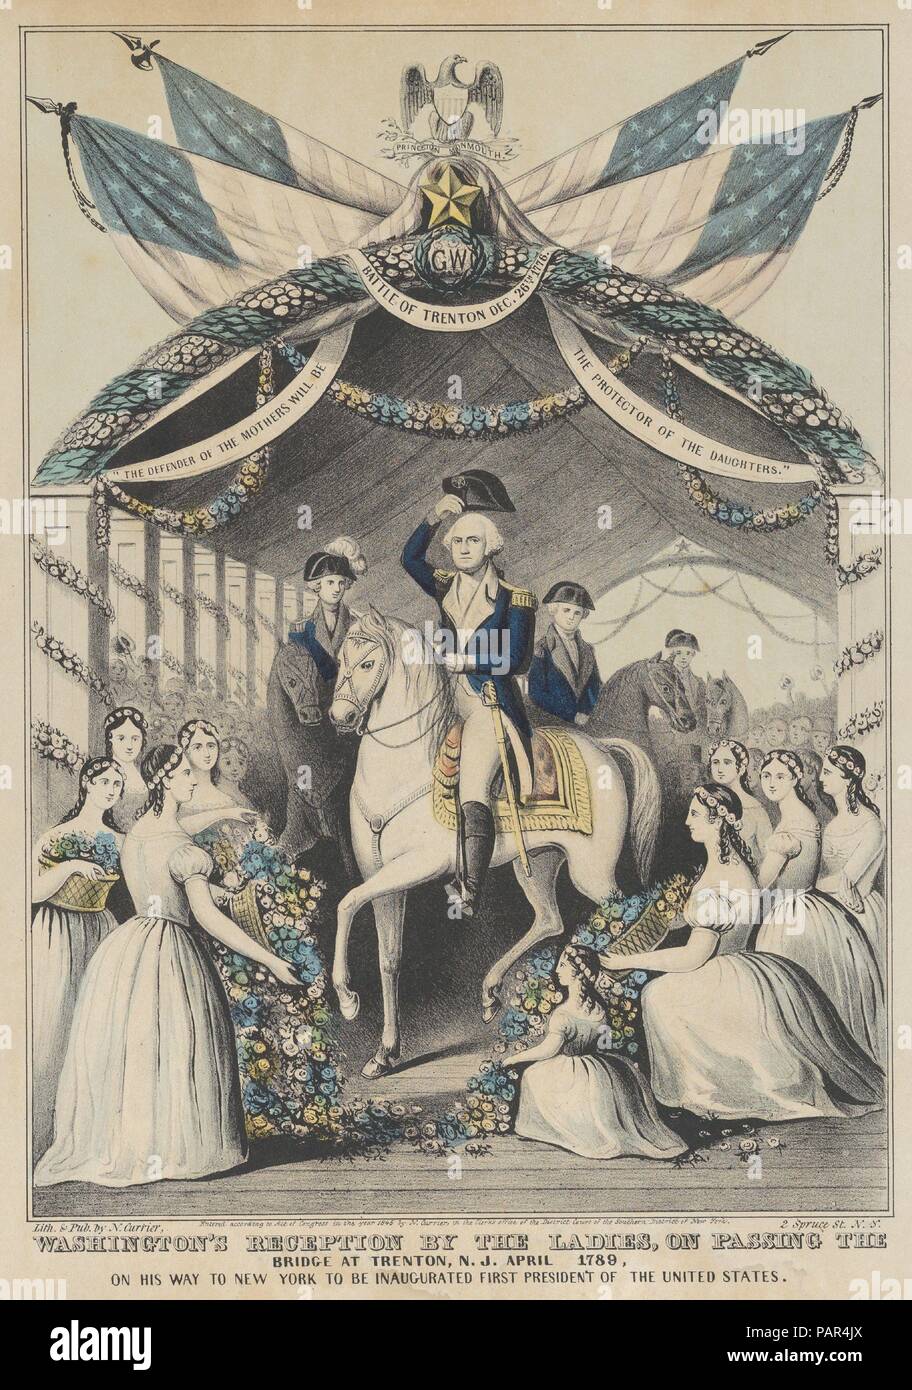 Washington's Reception by the Ladies on Passing the Bridge at Trenton, N.J., April 1789, on His Way to be Inaugurated First President of the United States. Dimensions: Image: 12 1/16 × 8 3/4 in. (30.7 × 22.3 cm)  Sheet: 14 1/8 × 12 1/8 in. (35.8 × 30.8 cm). Publisher: Lithographed and published by Nathaniel Currier (American, Roxbury, Massachusetts 1813-1888 New York). Sitter: George Washington (American, 1732-1799). Date: 1845.  George Washington on horseback, accompanied by other gentlemen, is greeted by ladies bearing flowers as he rides over the bridge at Trenton. Banners bear the followin Stock Photo